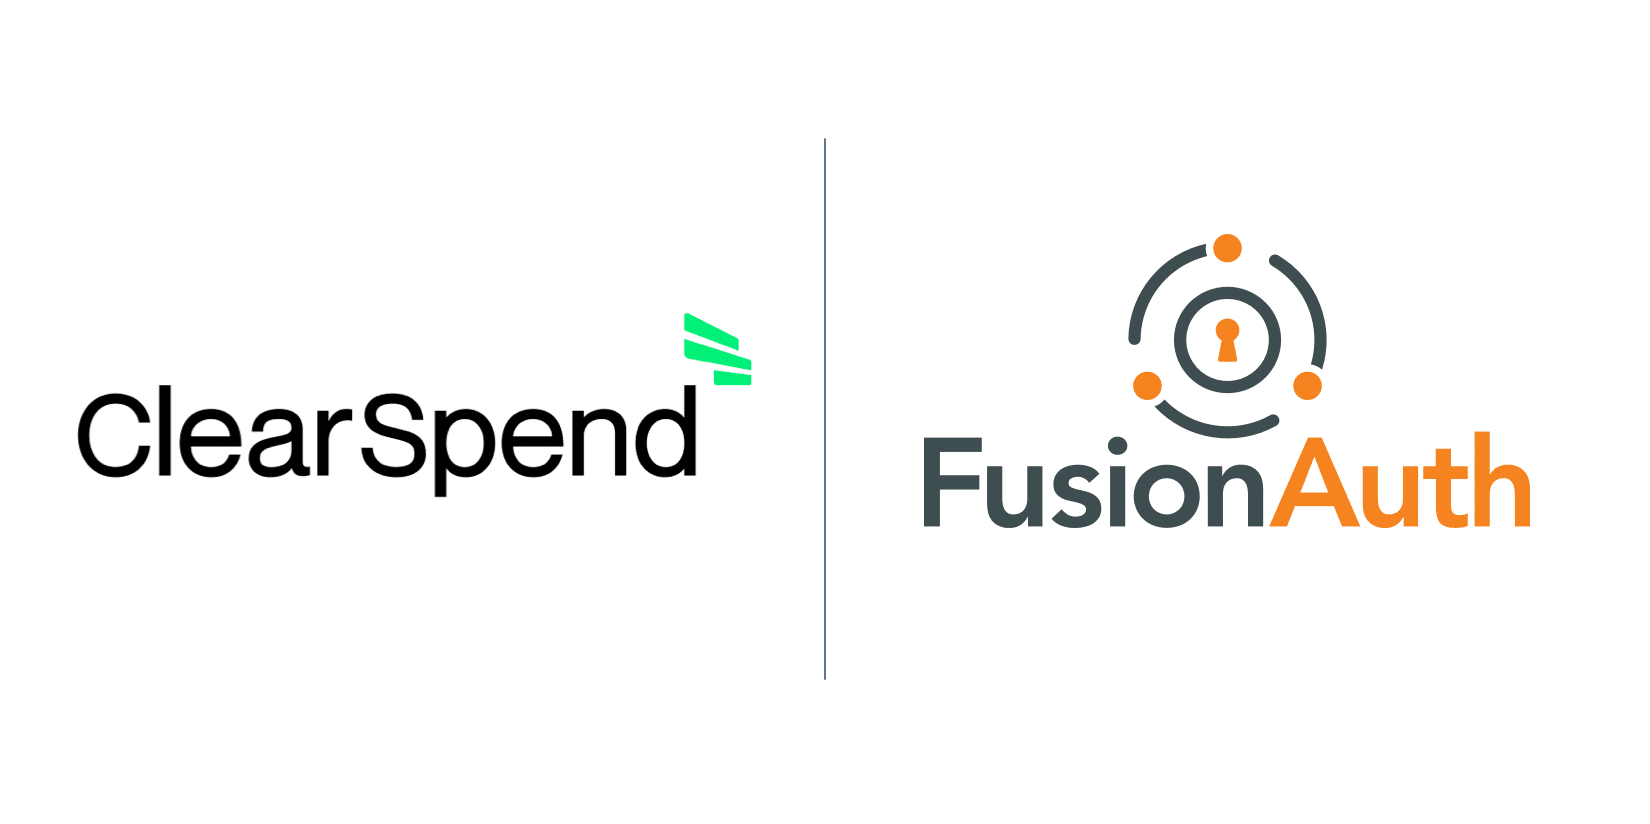 ClearSpend chose FusionAuth because of self-hosting and clear APIs